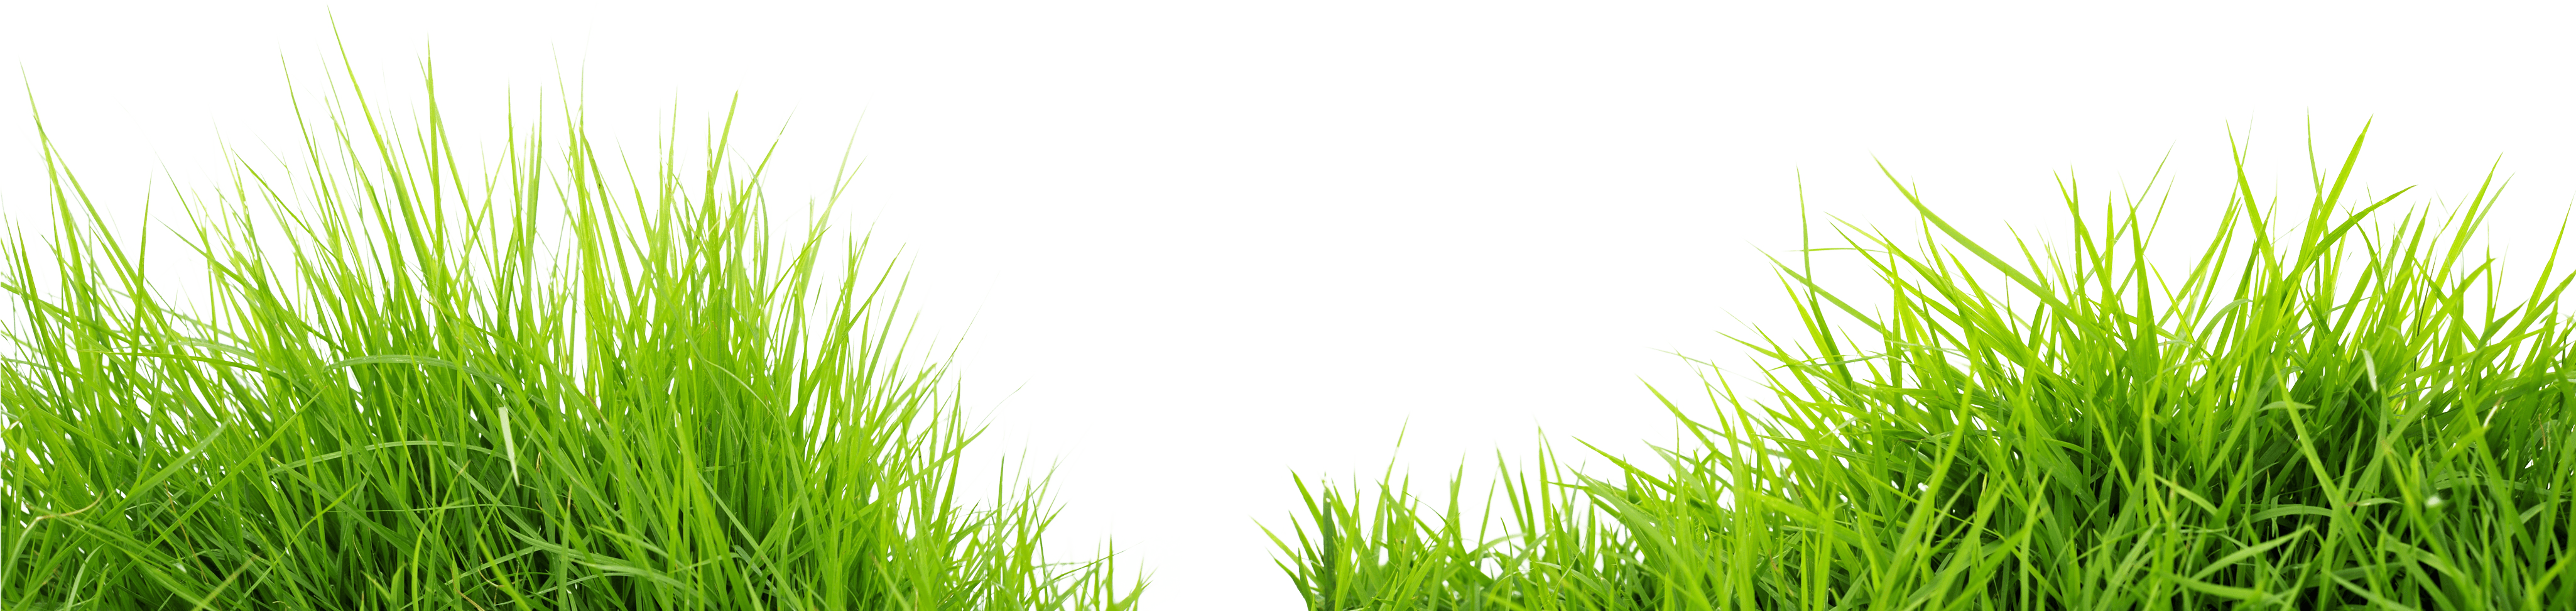 Grass Hd Png Images Grass Texture Clipart Free Download Free Transparent Png Logos,Half Square Triangles 4 At A Time